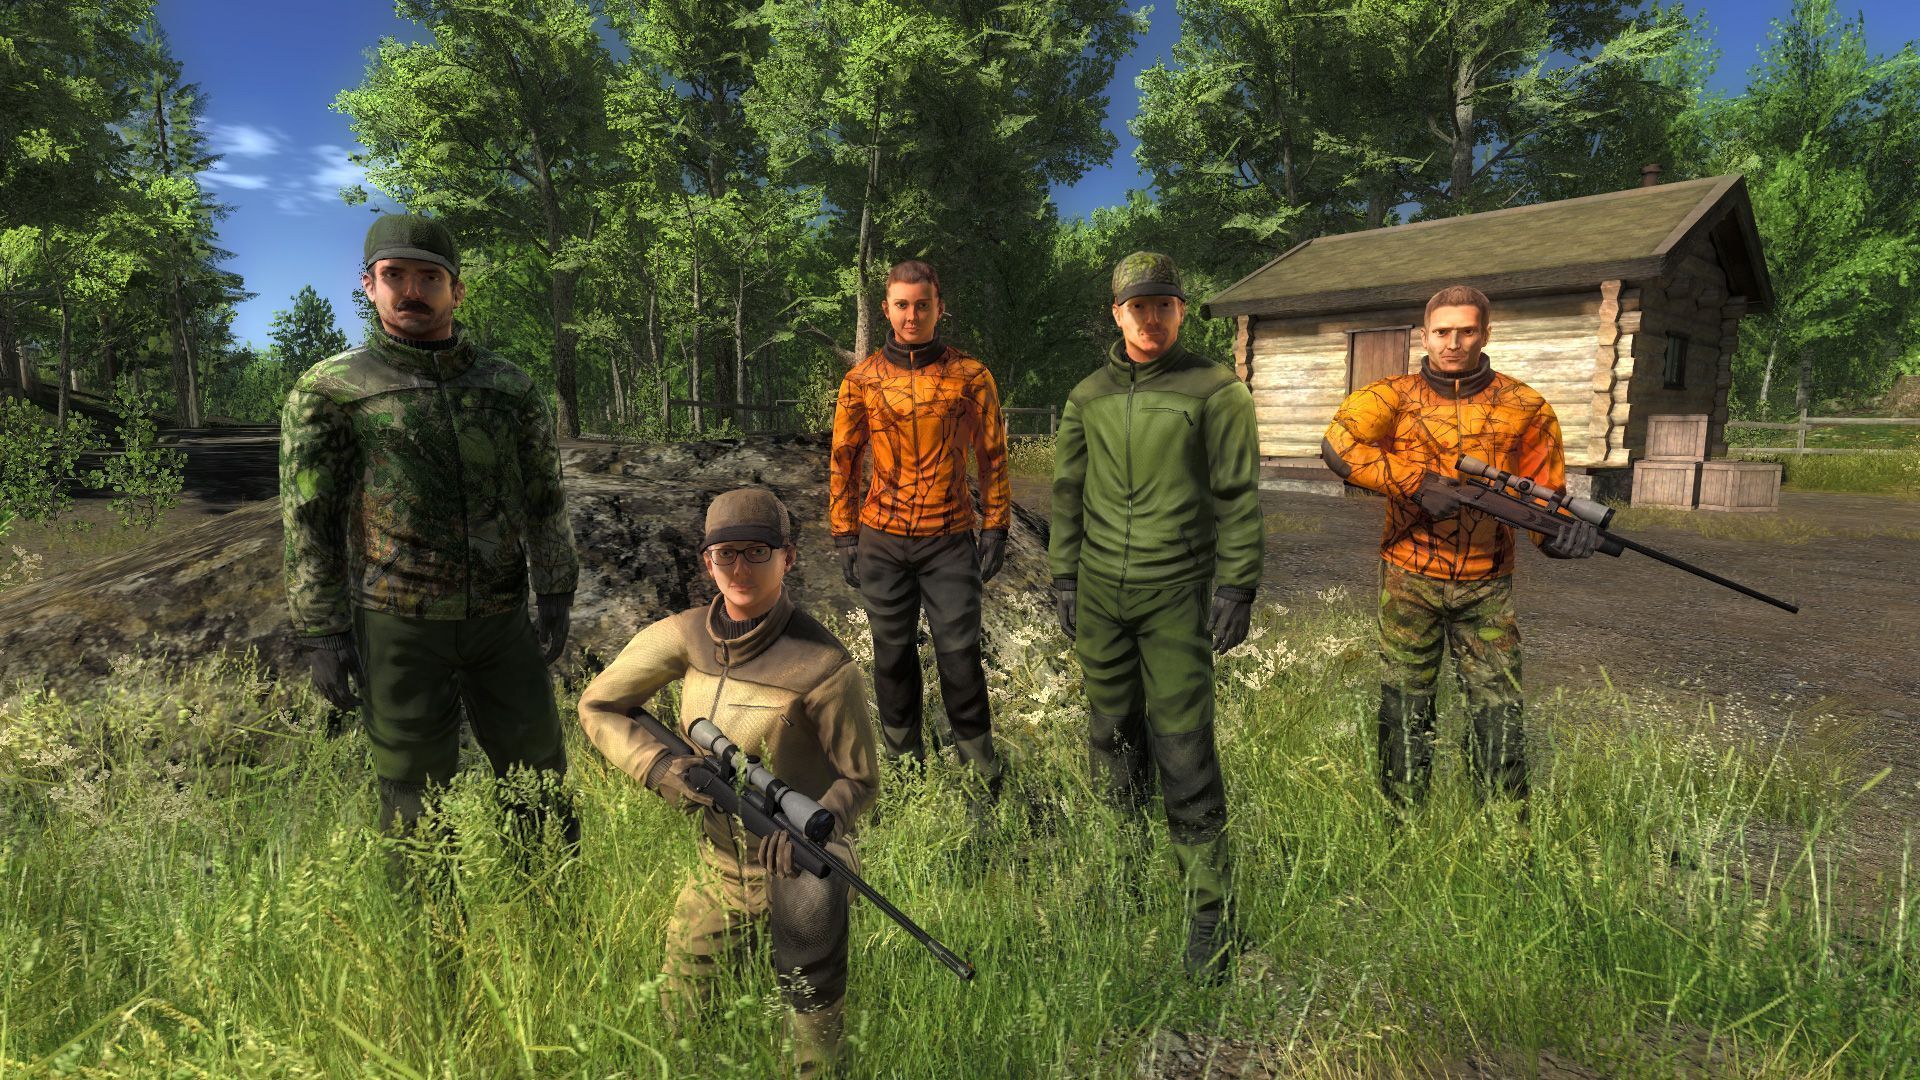 hunter call of the wild pc mods in multiplayer